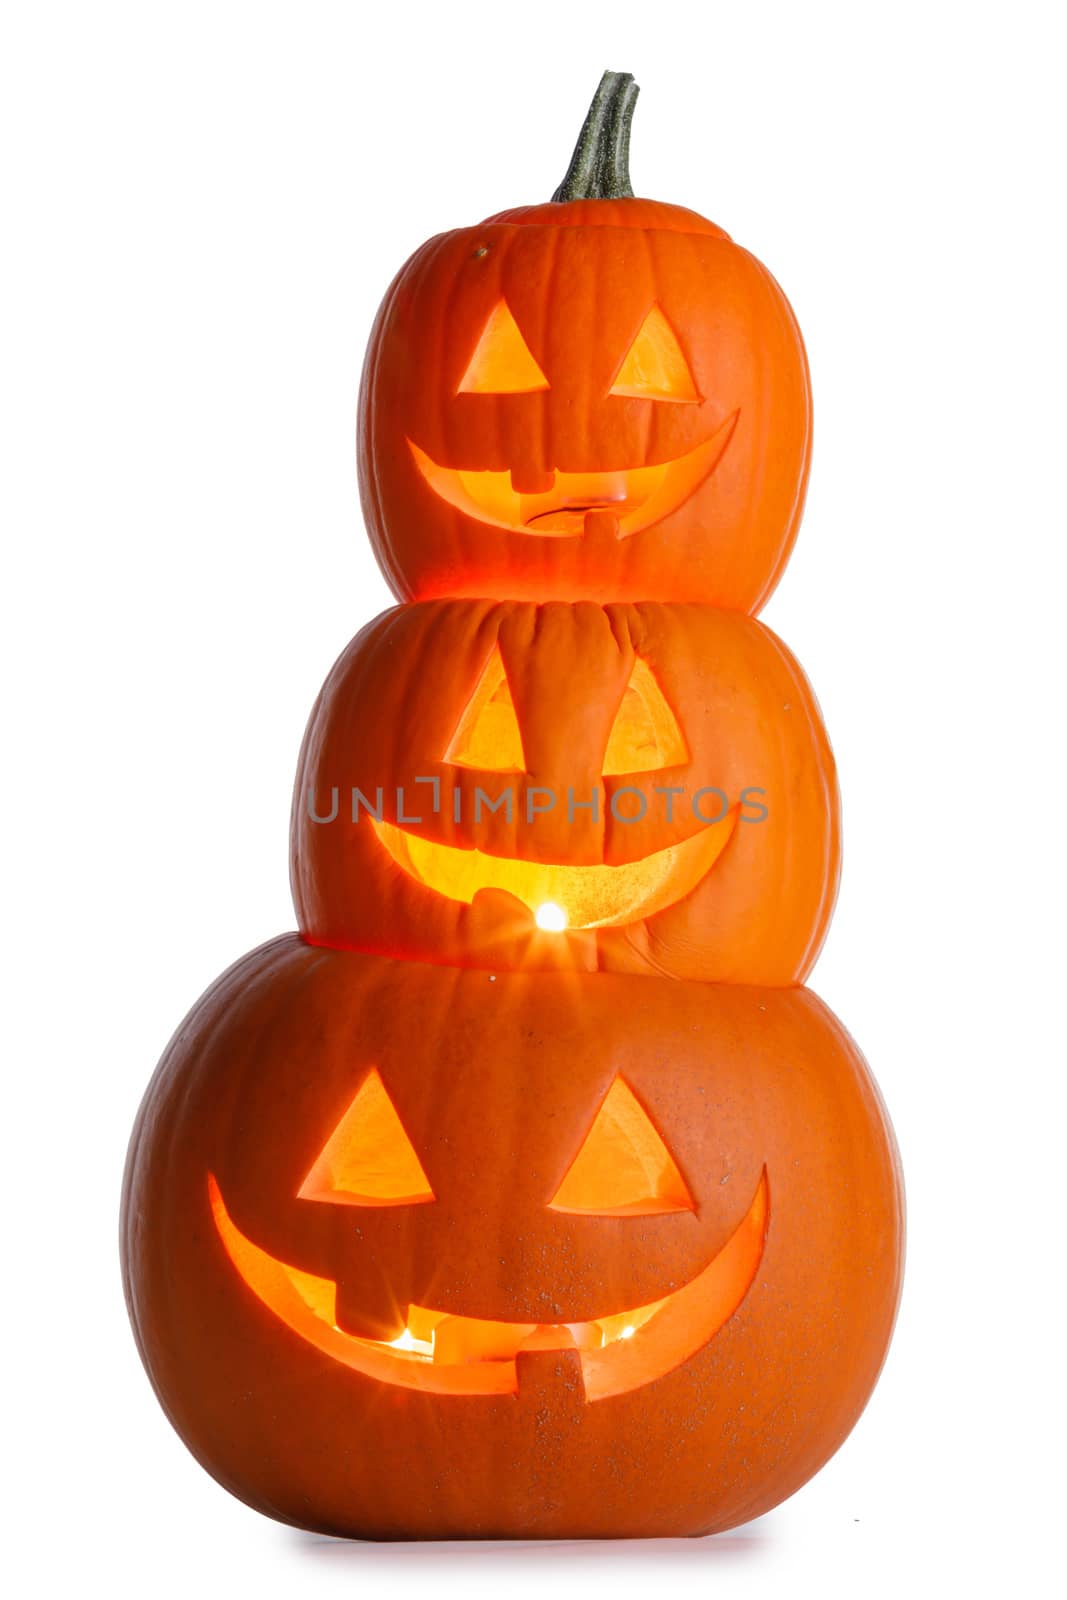 Stack of Halloween Pumpkins on white by Yellowj